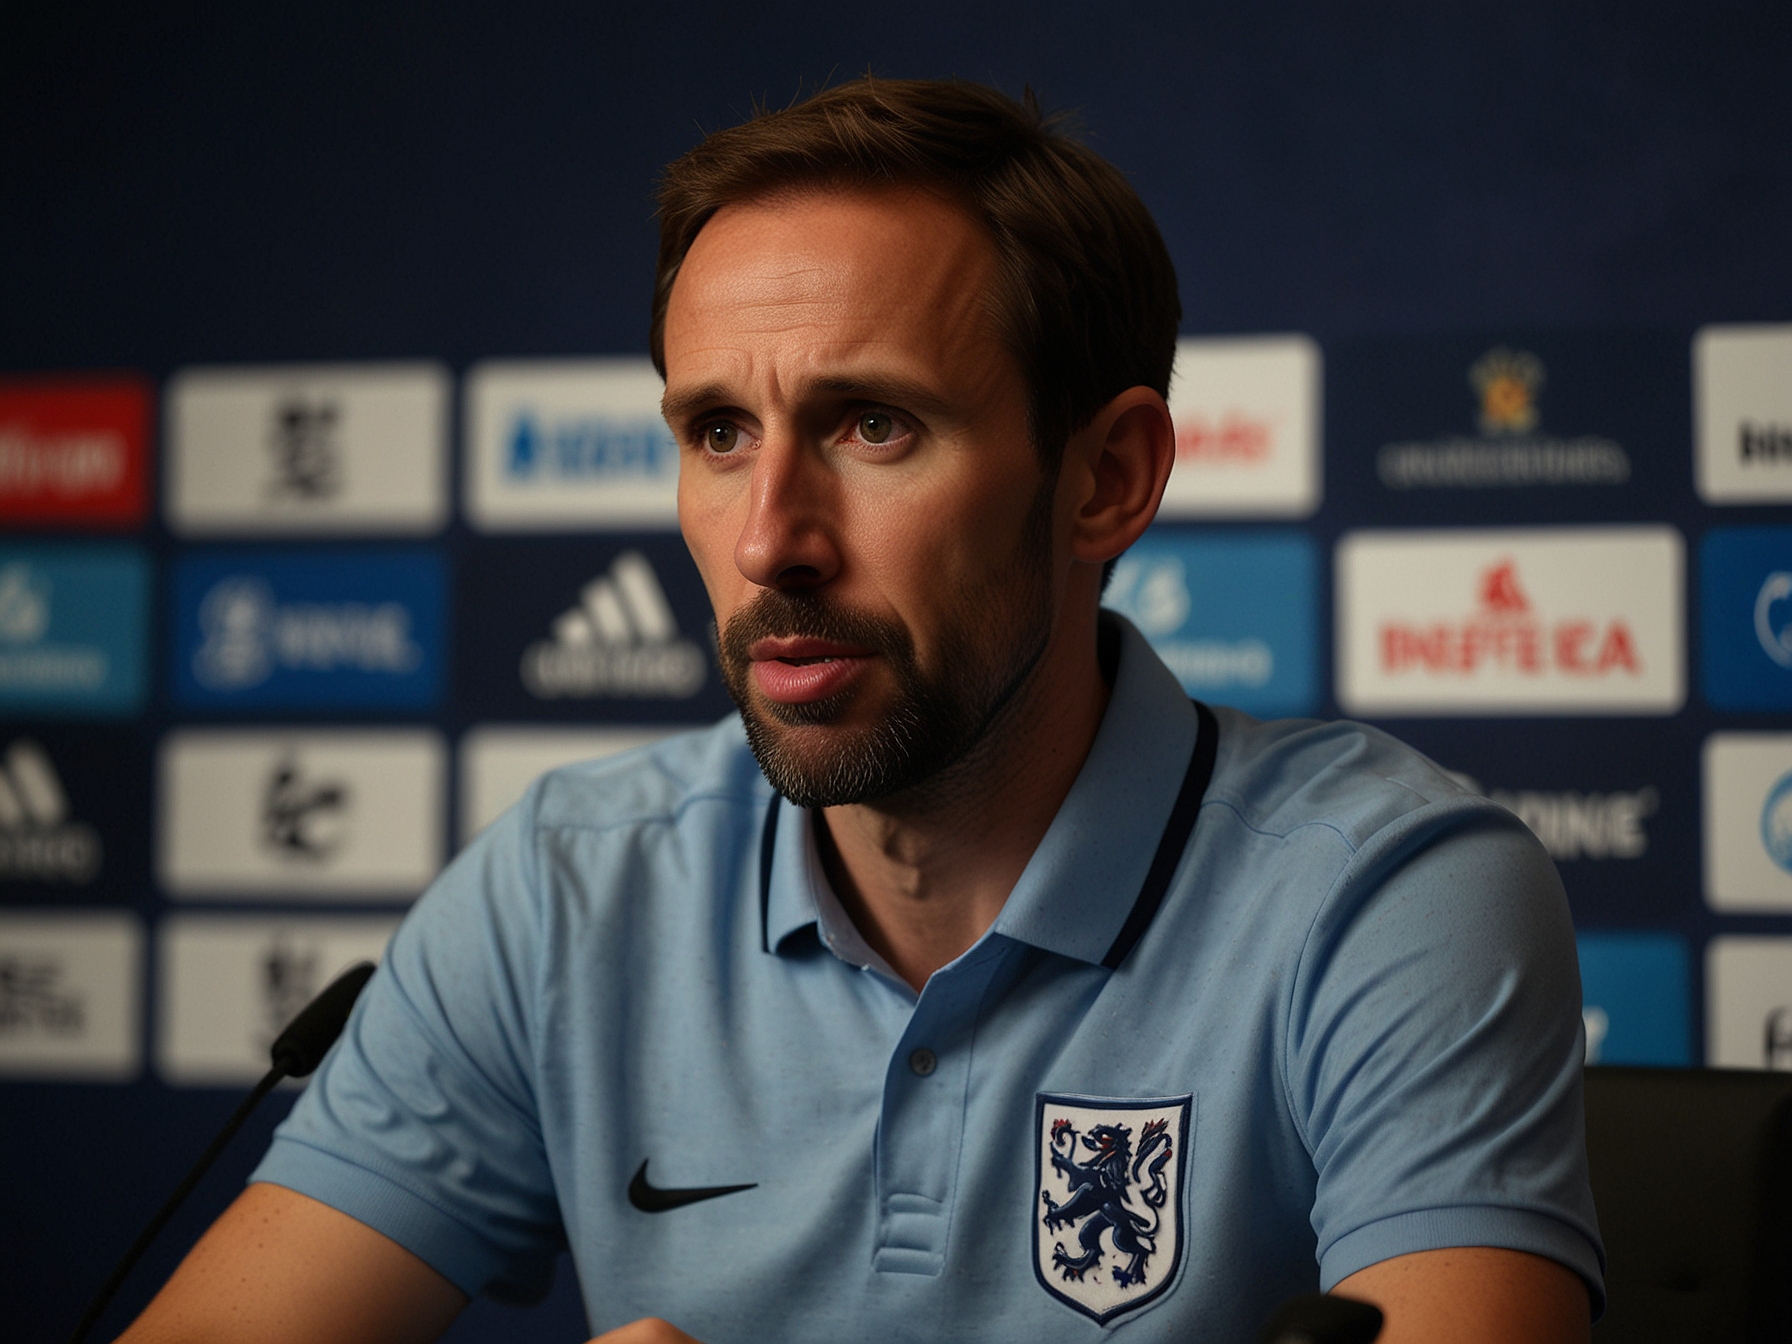 England manager Gareth Southgate addressing the media at a press conference, stressing the need for players to adapt to challenging pitch conditions after the draw against Denmark.